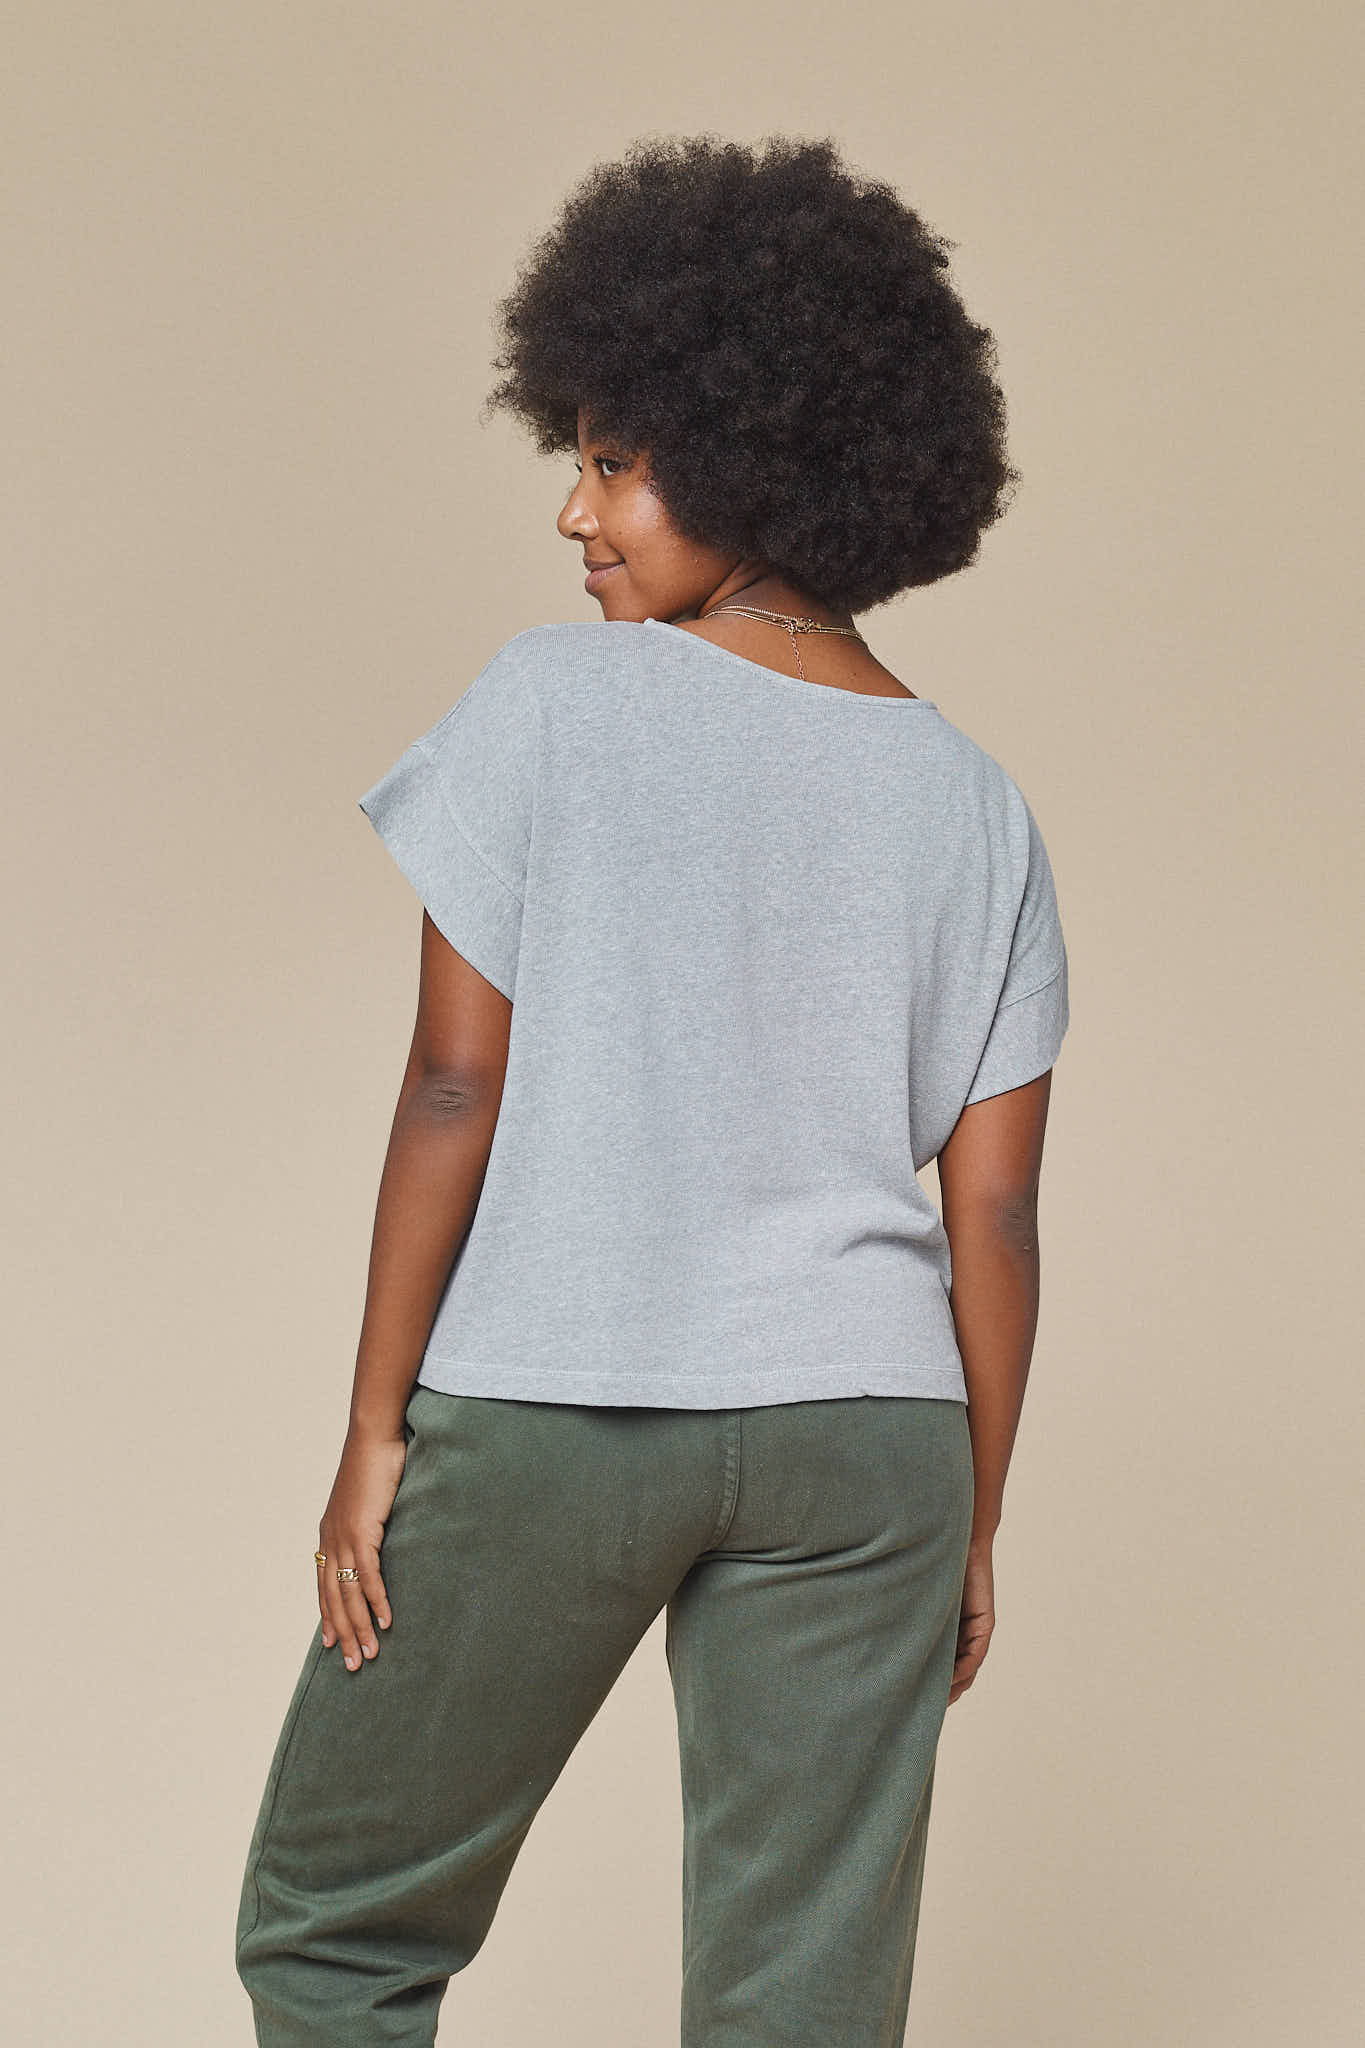 Heathered Taos Top | Jungmaven Hemp Clothing & Accessories / Color: